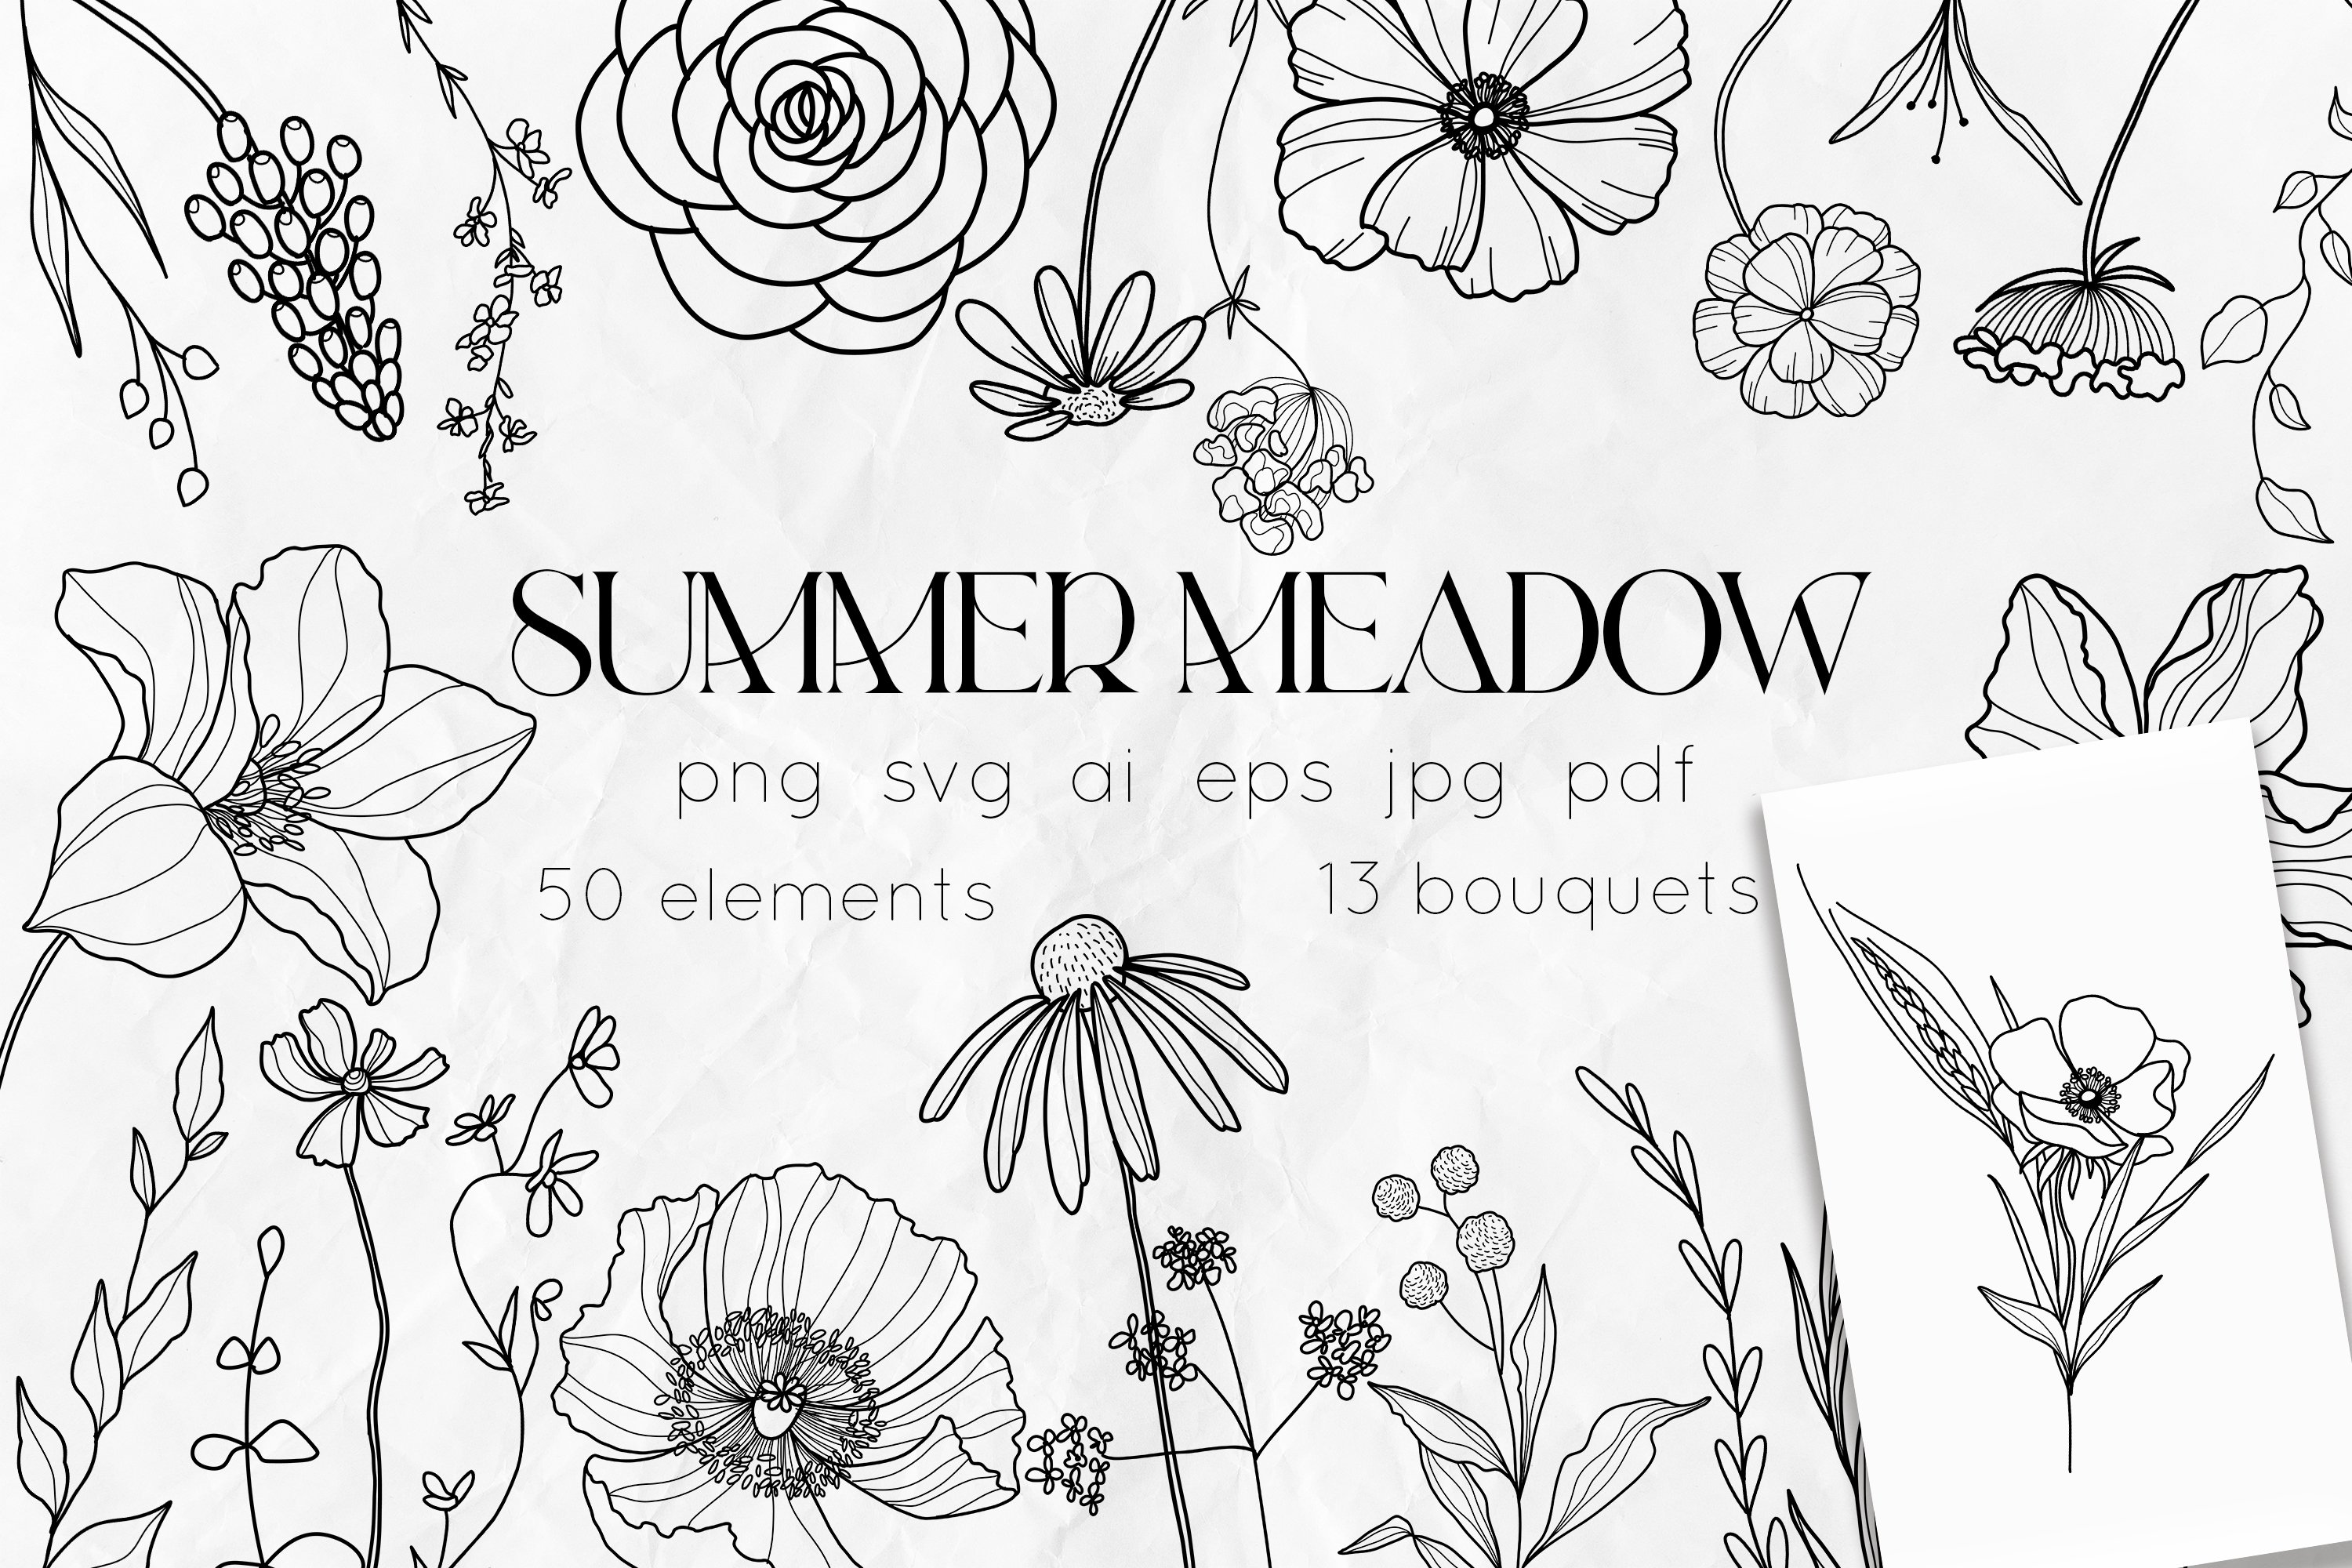 Summer Meadow Line Art Vector cover image.